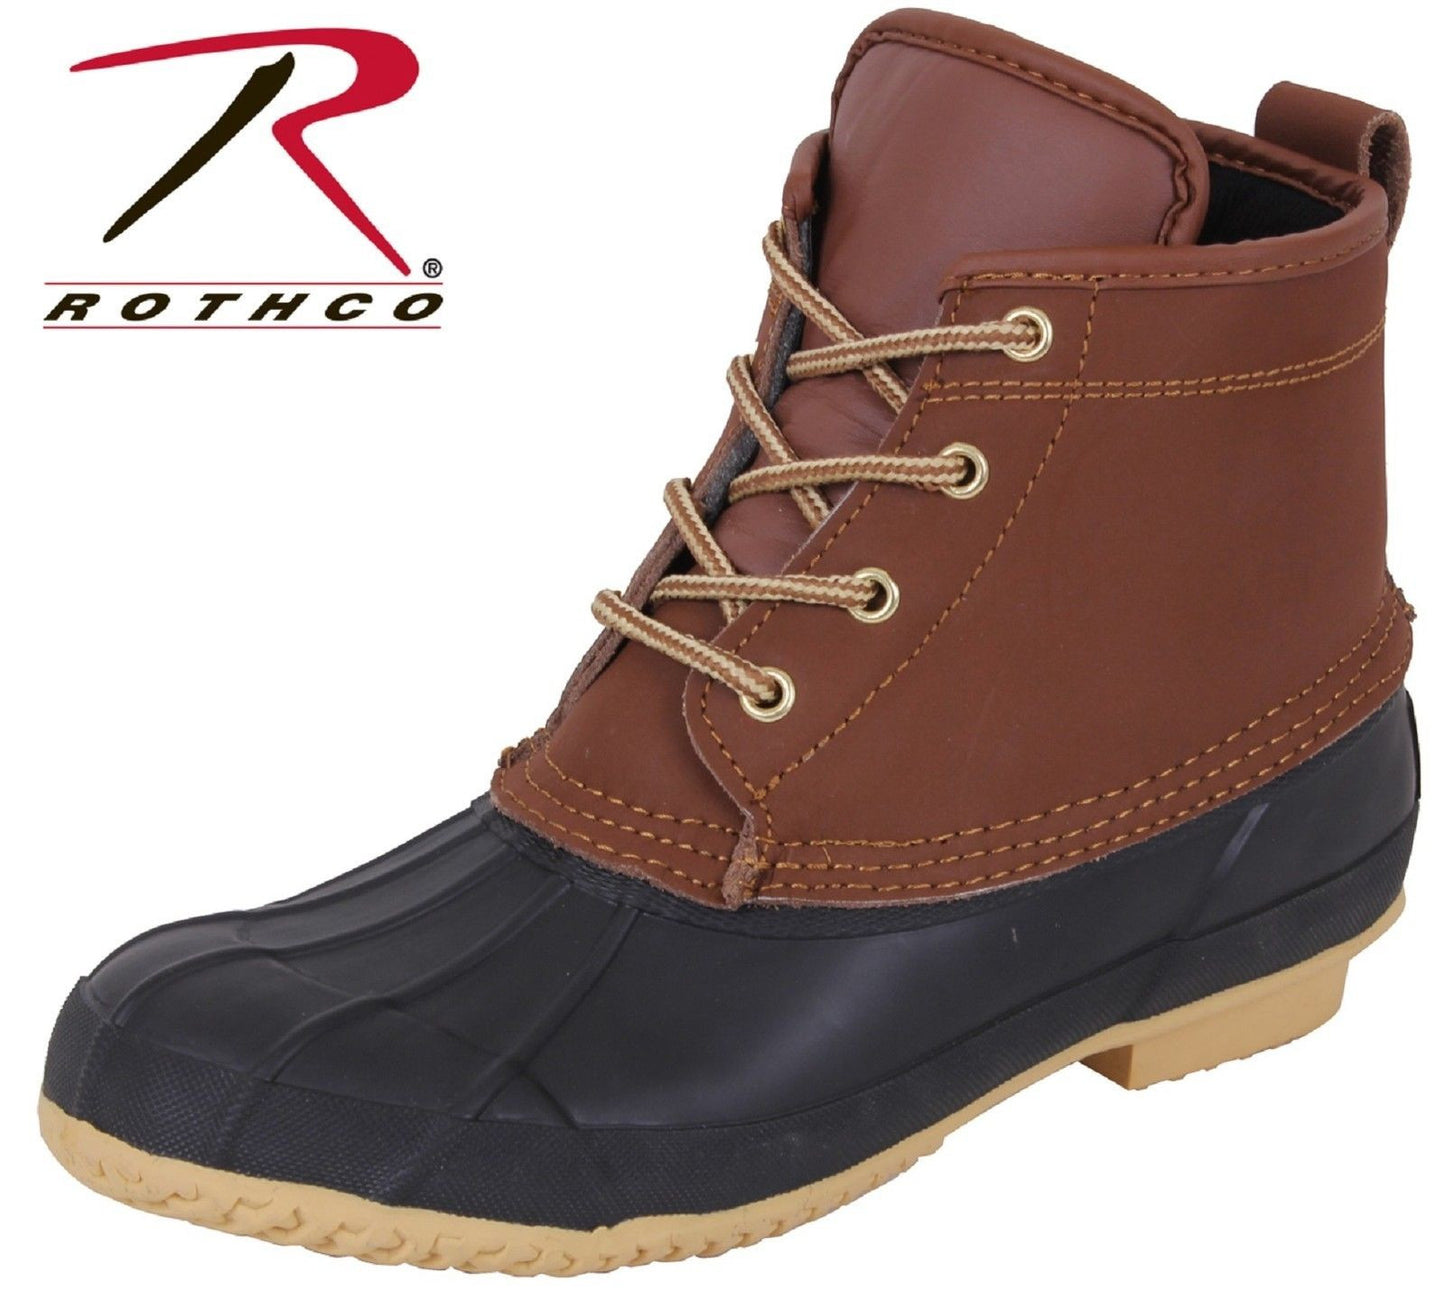 Waterproof Leather Duck Boots - 6" Brown & Black All Weather Rain Boots